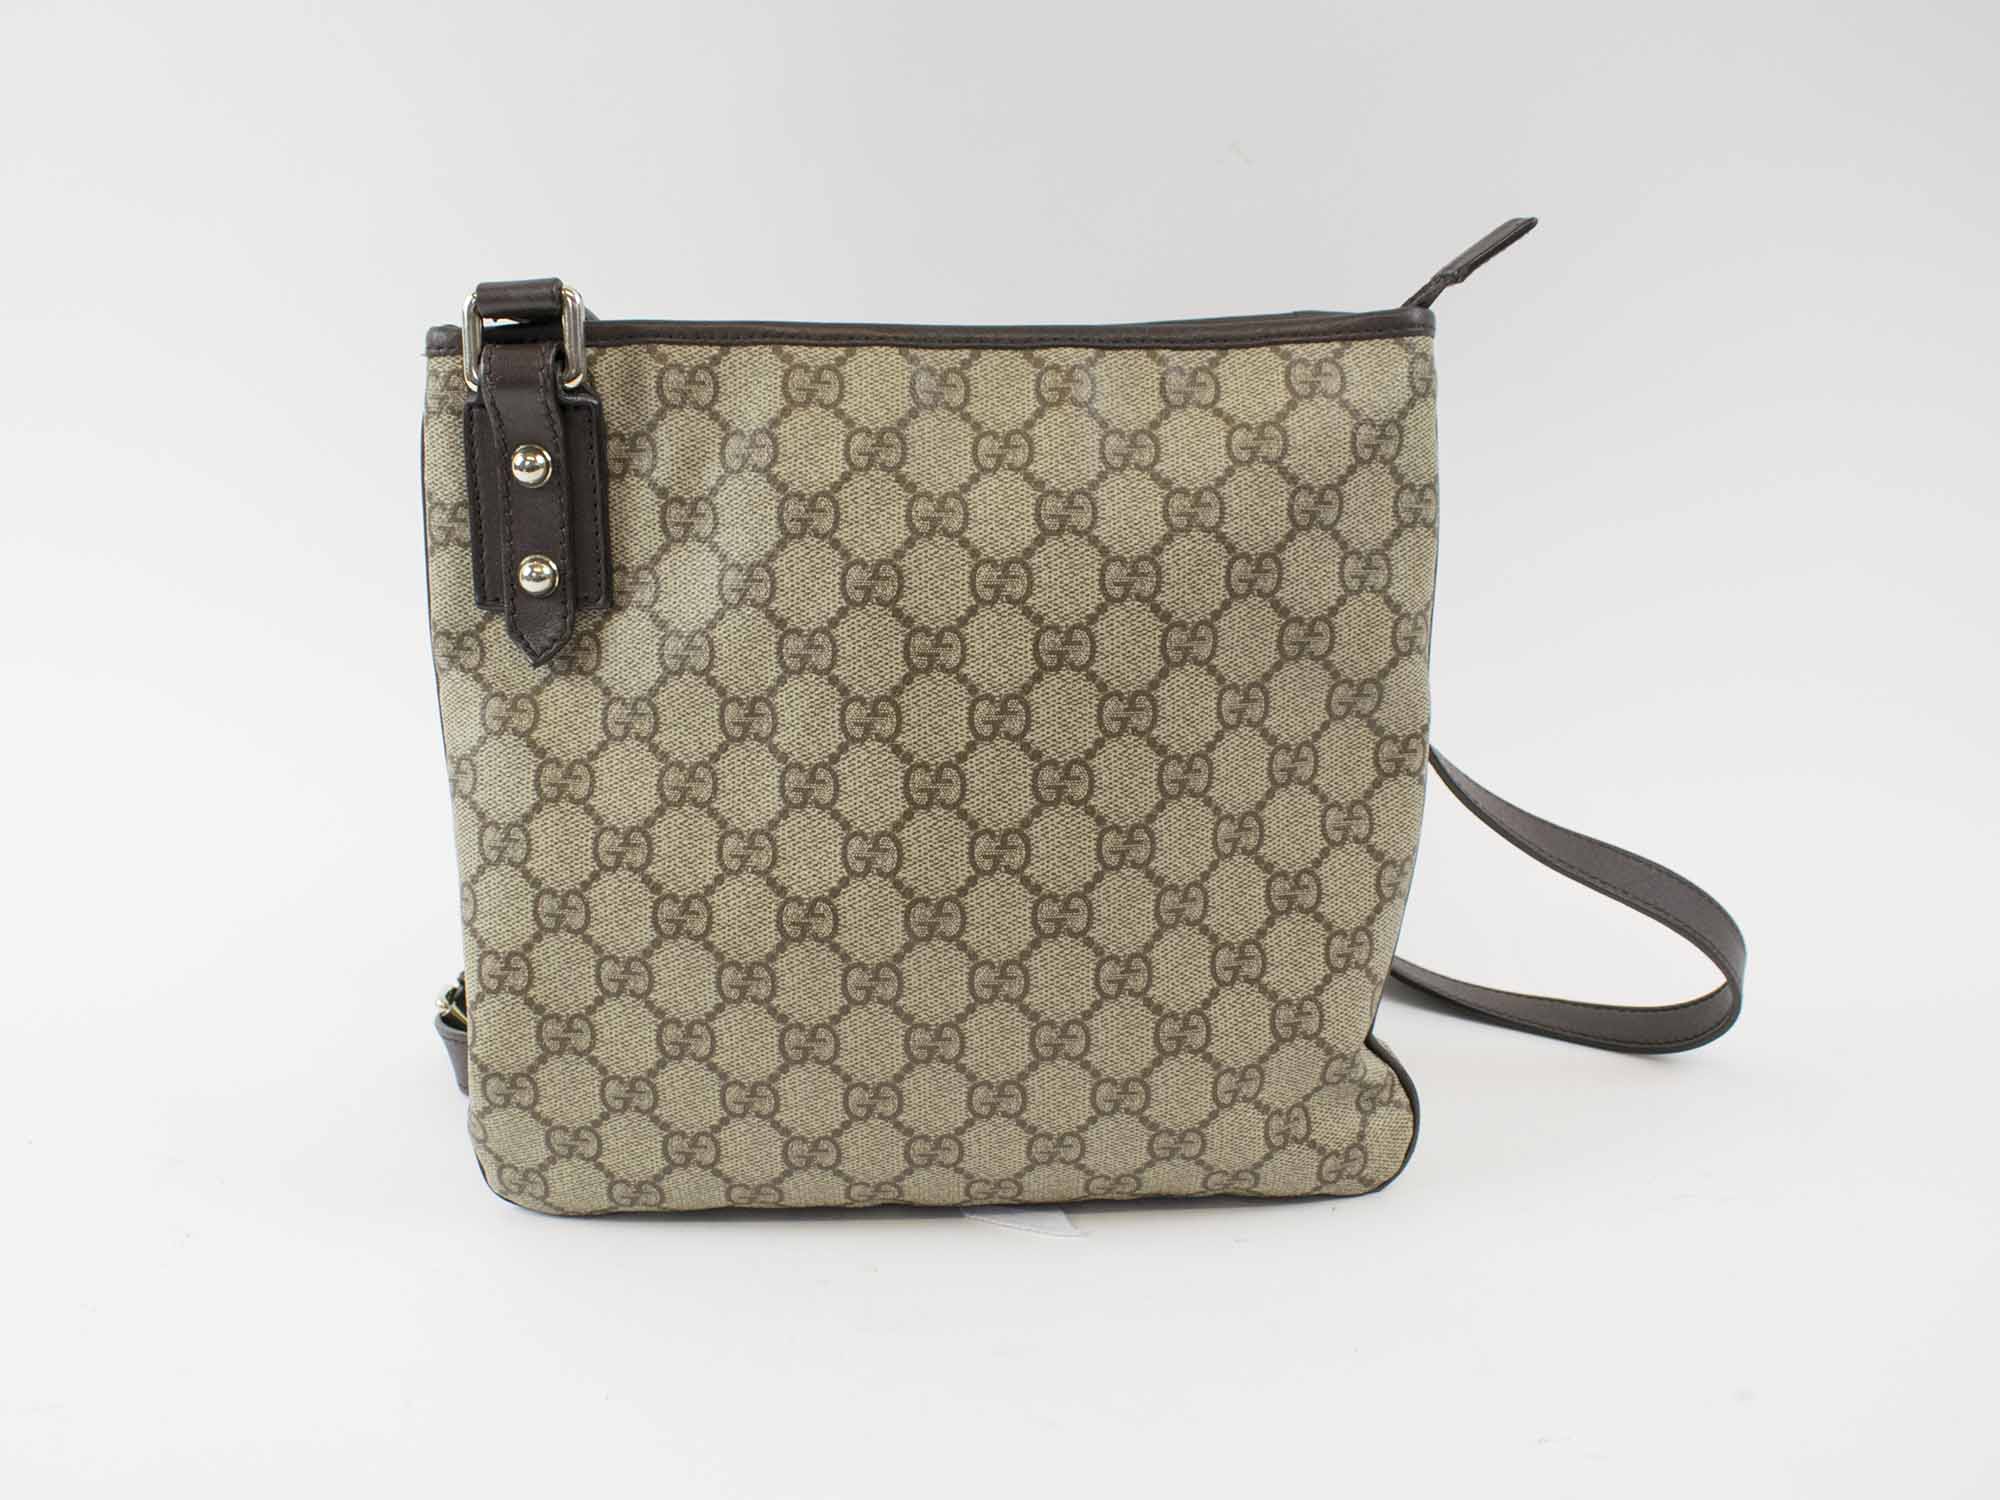 GUCCI CROSSBODY VINTAGE FLAT MESSENGER BAG, with iconic GG monogram canvas,  leather trims and adjustable strap, top zip closure, 25cm x 23cm H.